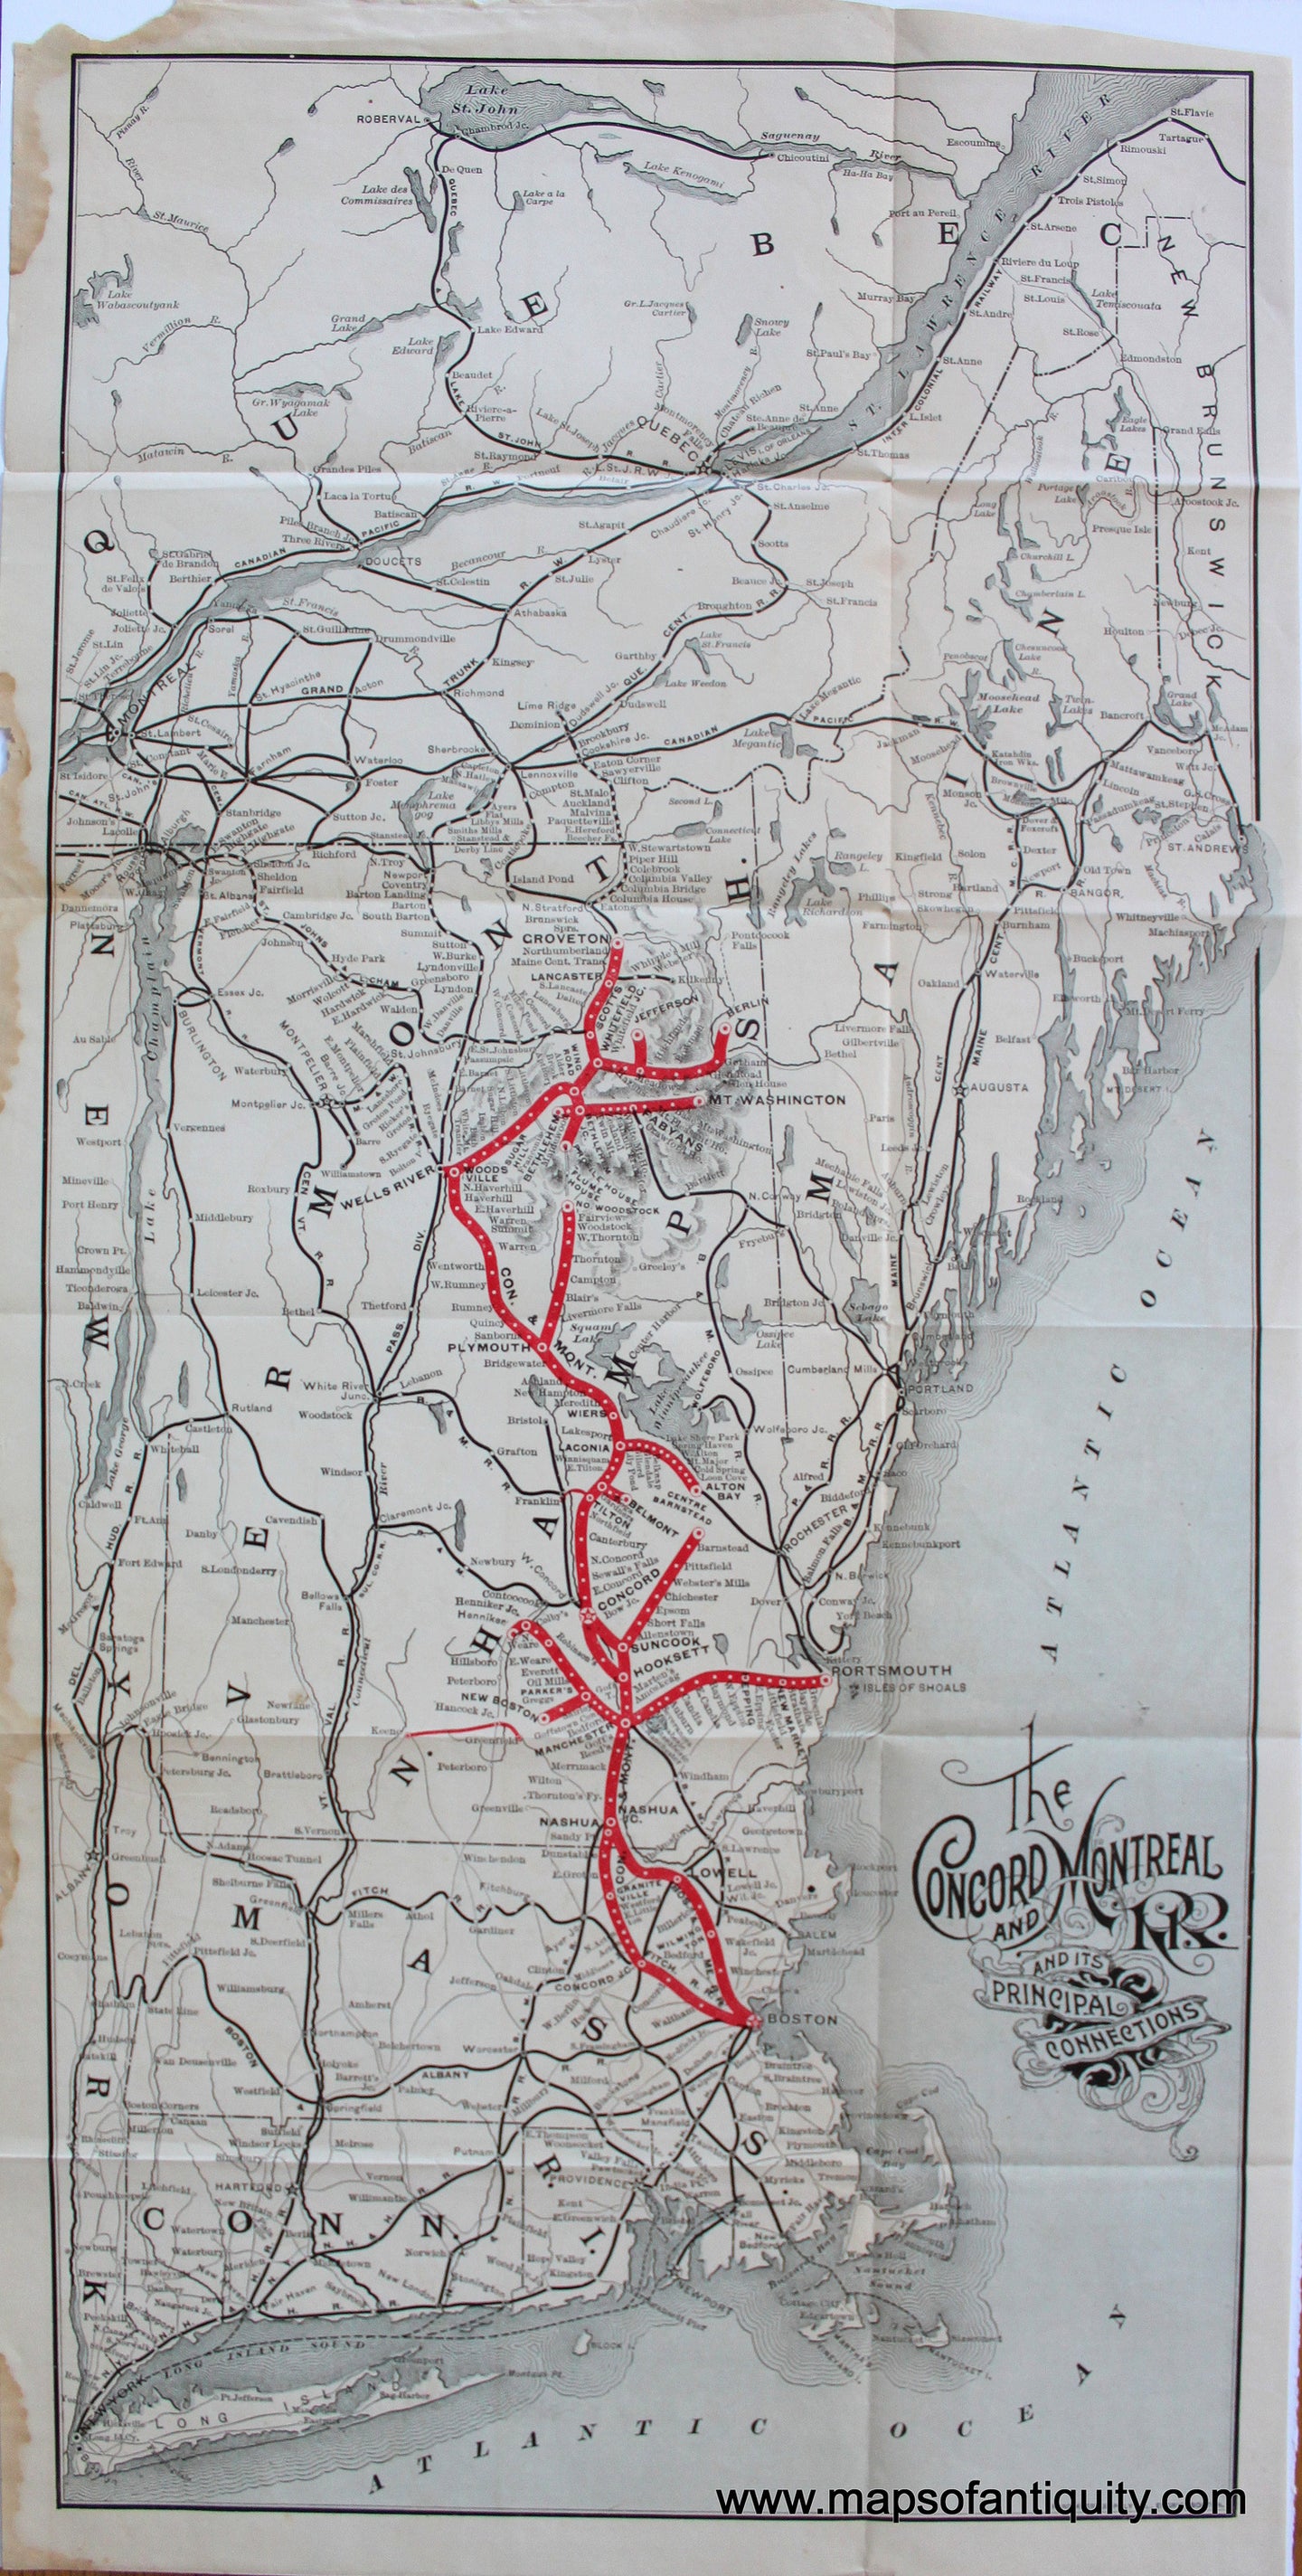 Antique-Printed-Color-Map-The-Concord-and-Montreal-Railroad-and-its-Principal-Connections-**********-United-States-Northeast-1889-1895-Rand-Avery-Supply-Co-Maps-Of-Antiquity